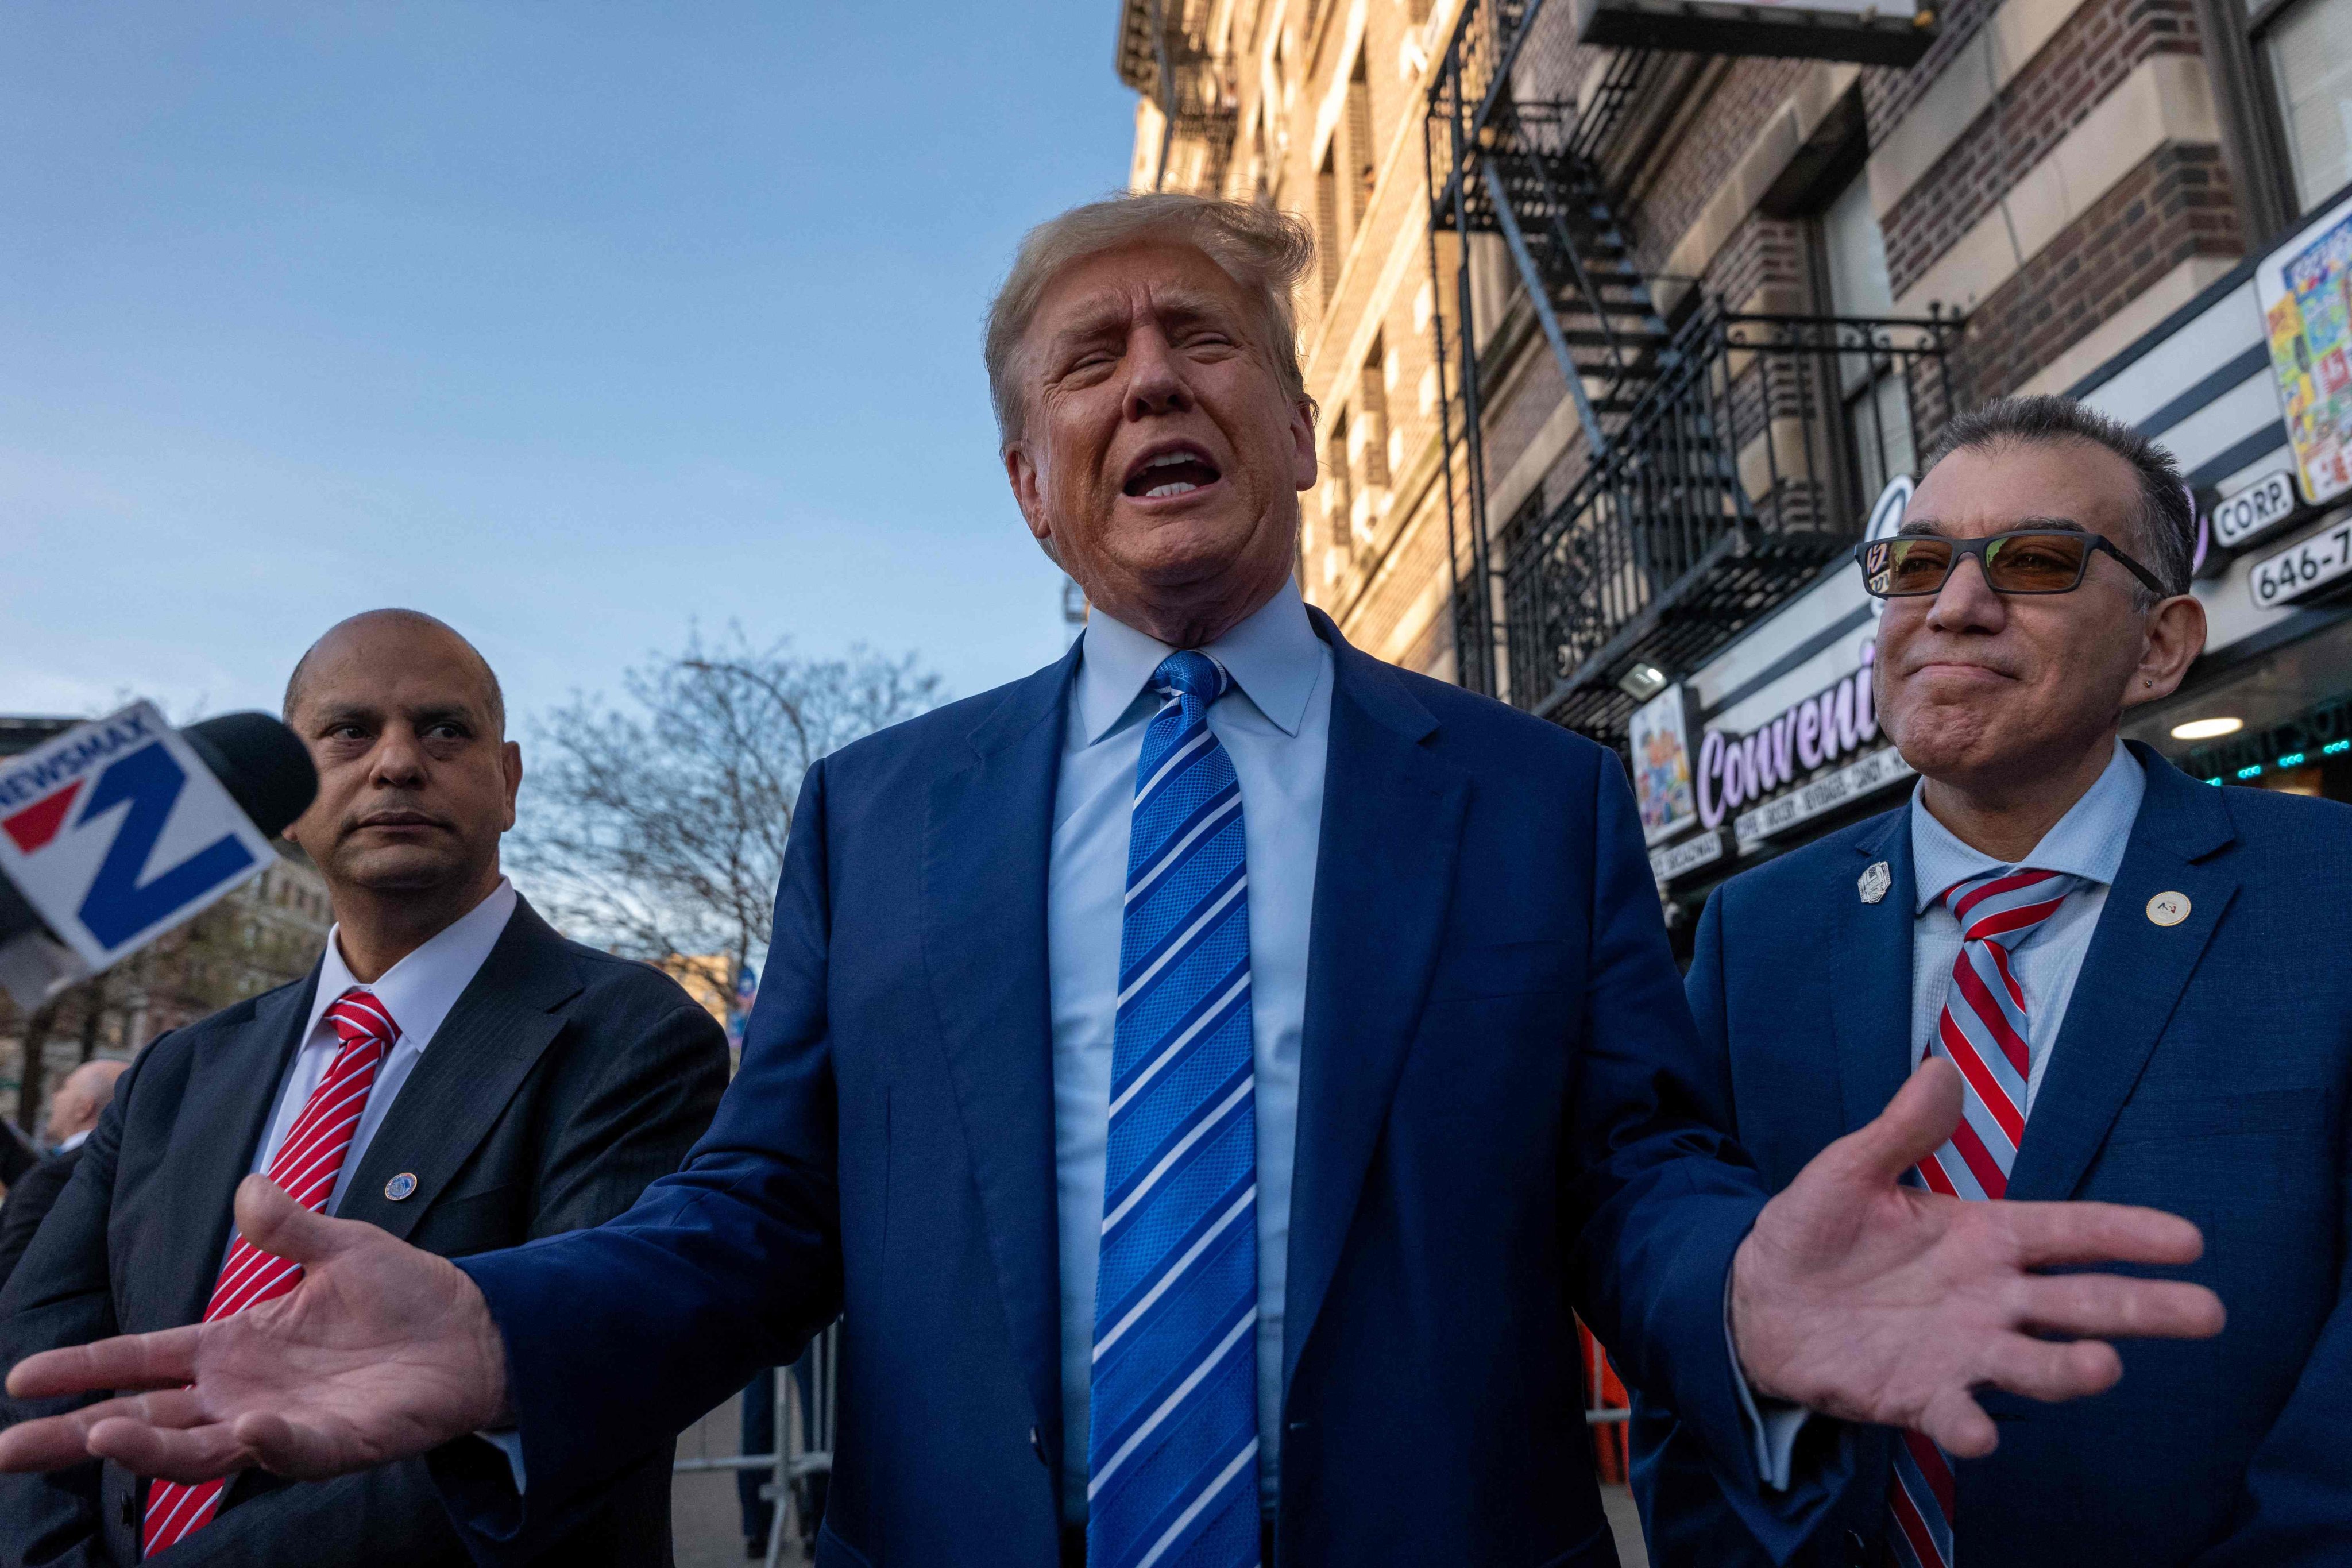 Donald Trump speaks to the media as he visits a bodega store in New York on Tuesday. Photo: AFP